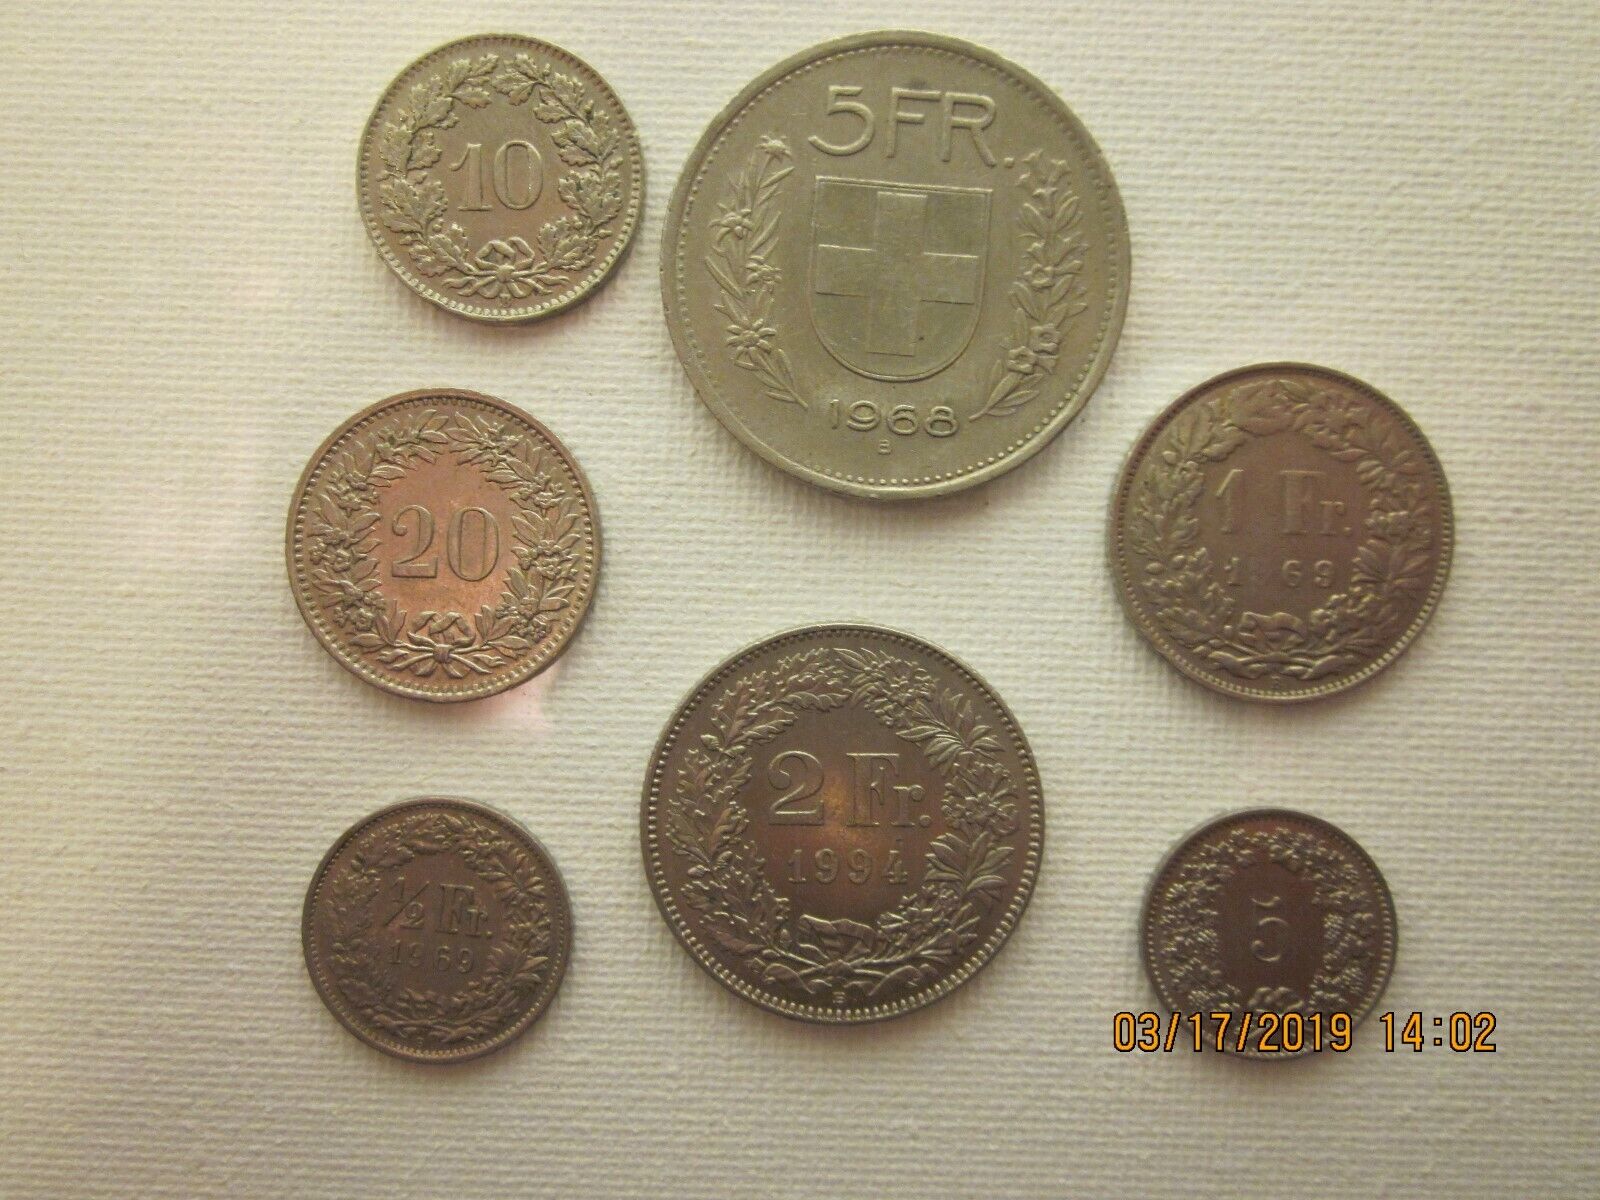  7 Swis Confoederatio Helvetica  coins ranging in date & Franc .  Great shape! Без бренда - фотография #3